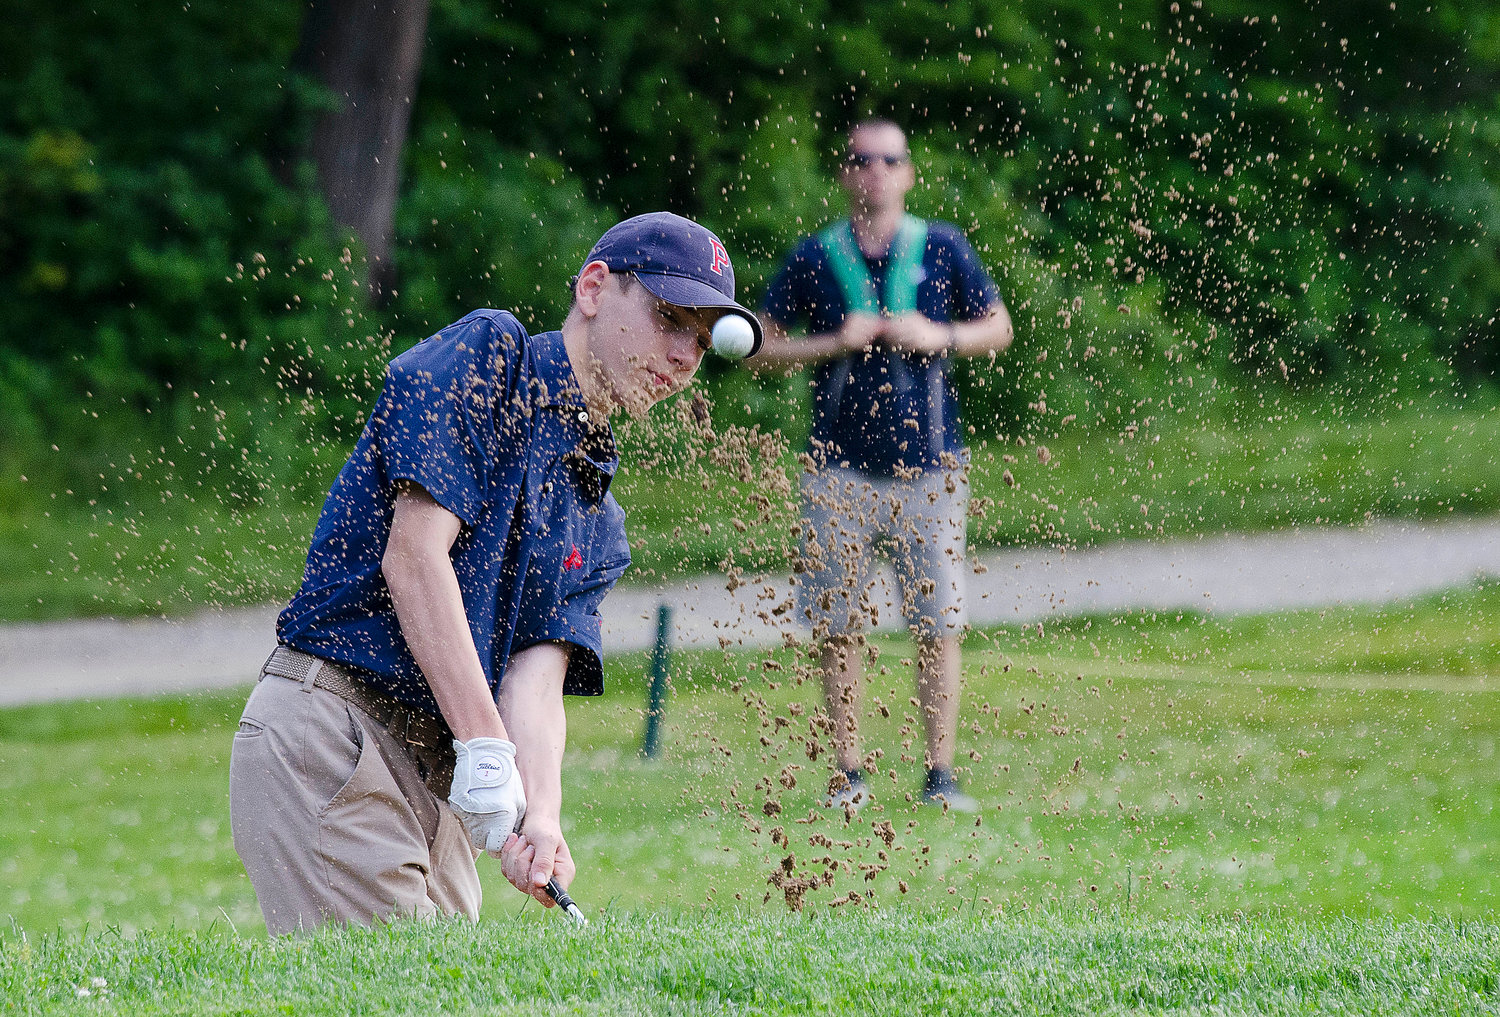 Kyle Bielawa, here chipping out of a sand trap, shot a 96 for Portsmouth.